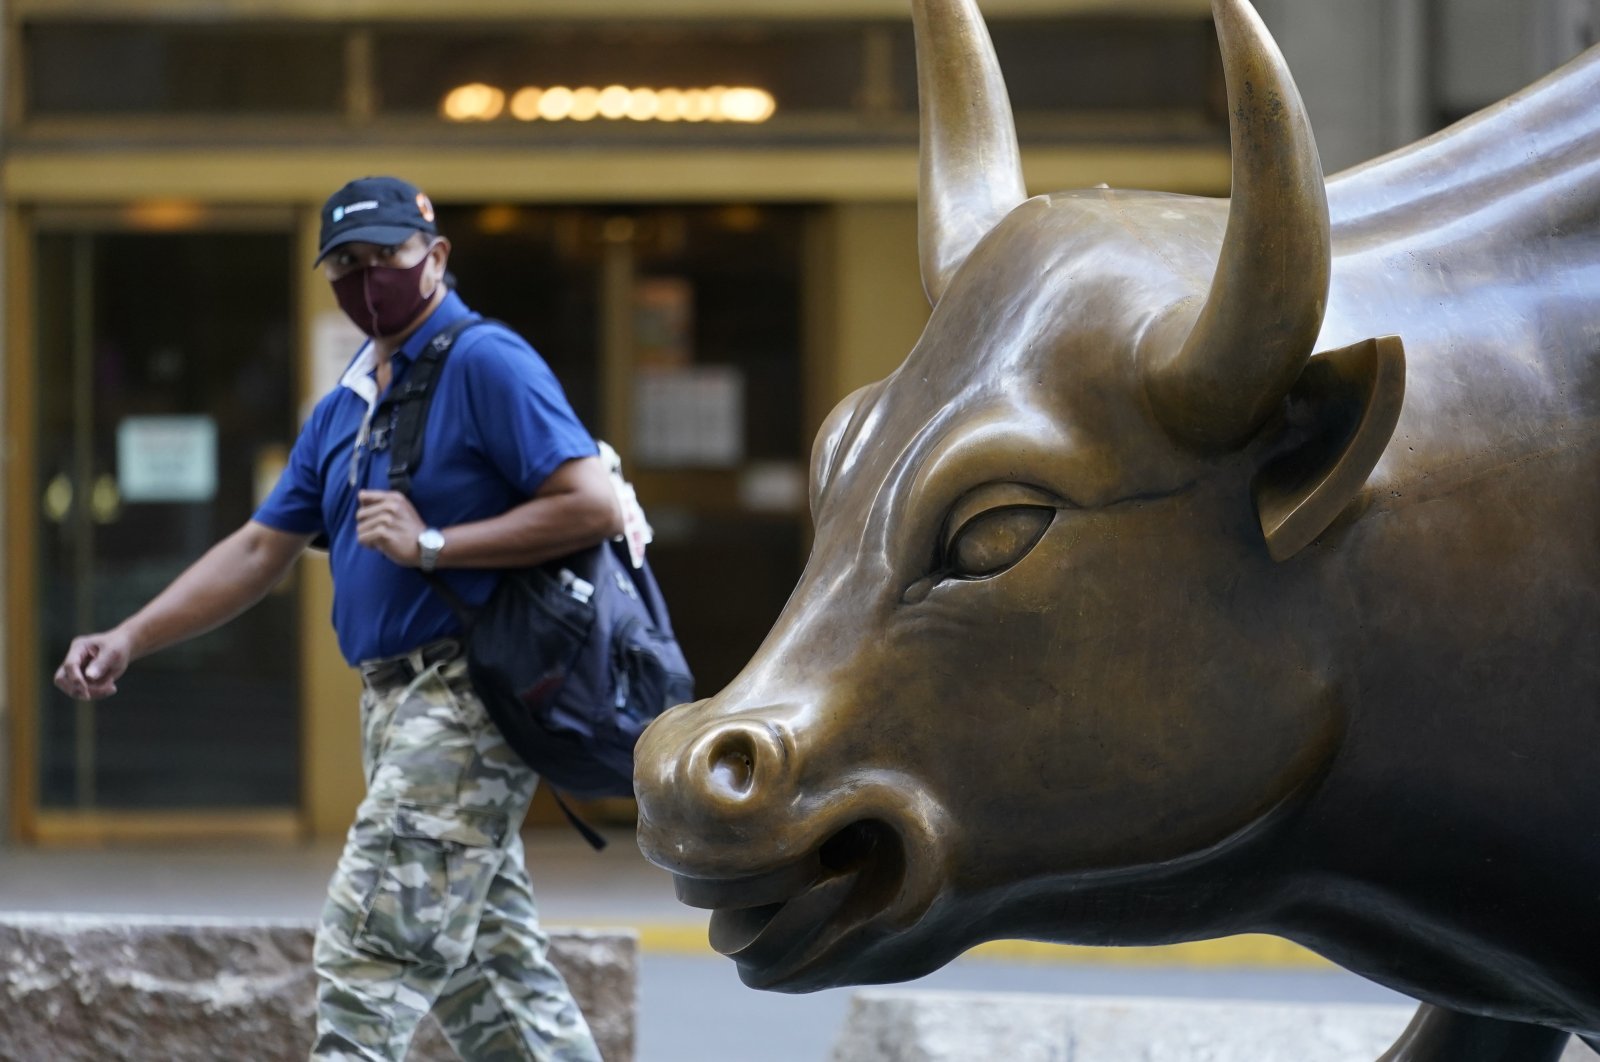 A man wearing a mask passes the Charging Bull statue in New York's financial district, Sept. 8, 2020. (AP Photo)